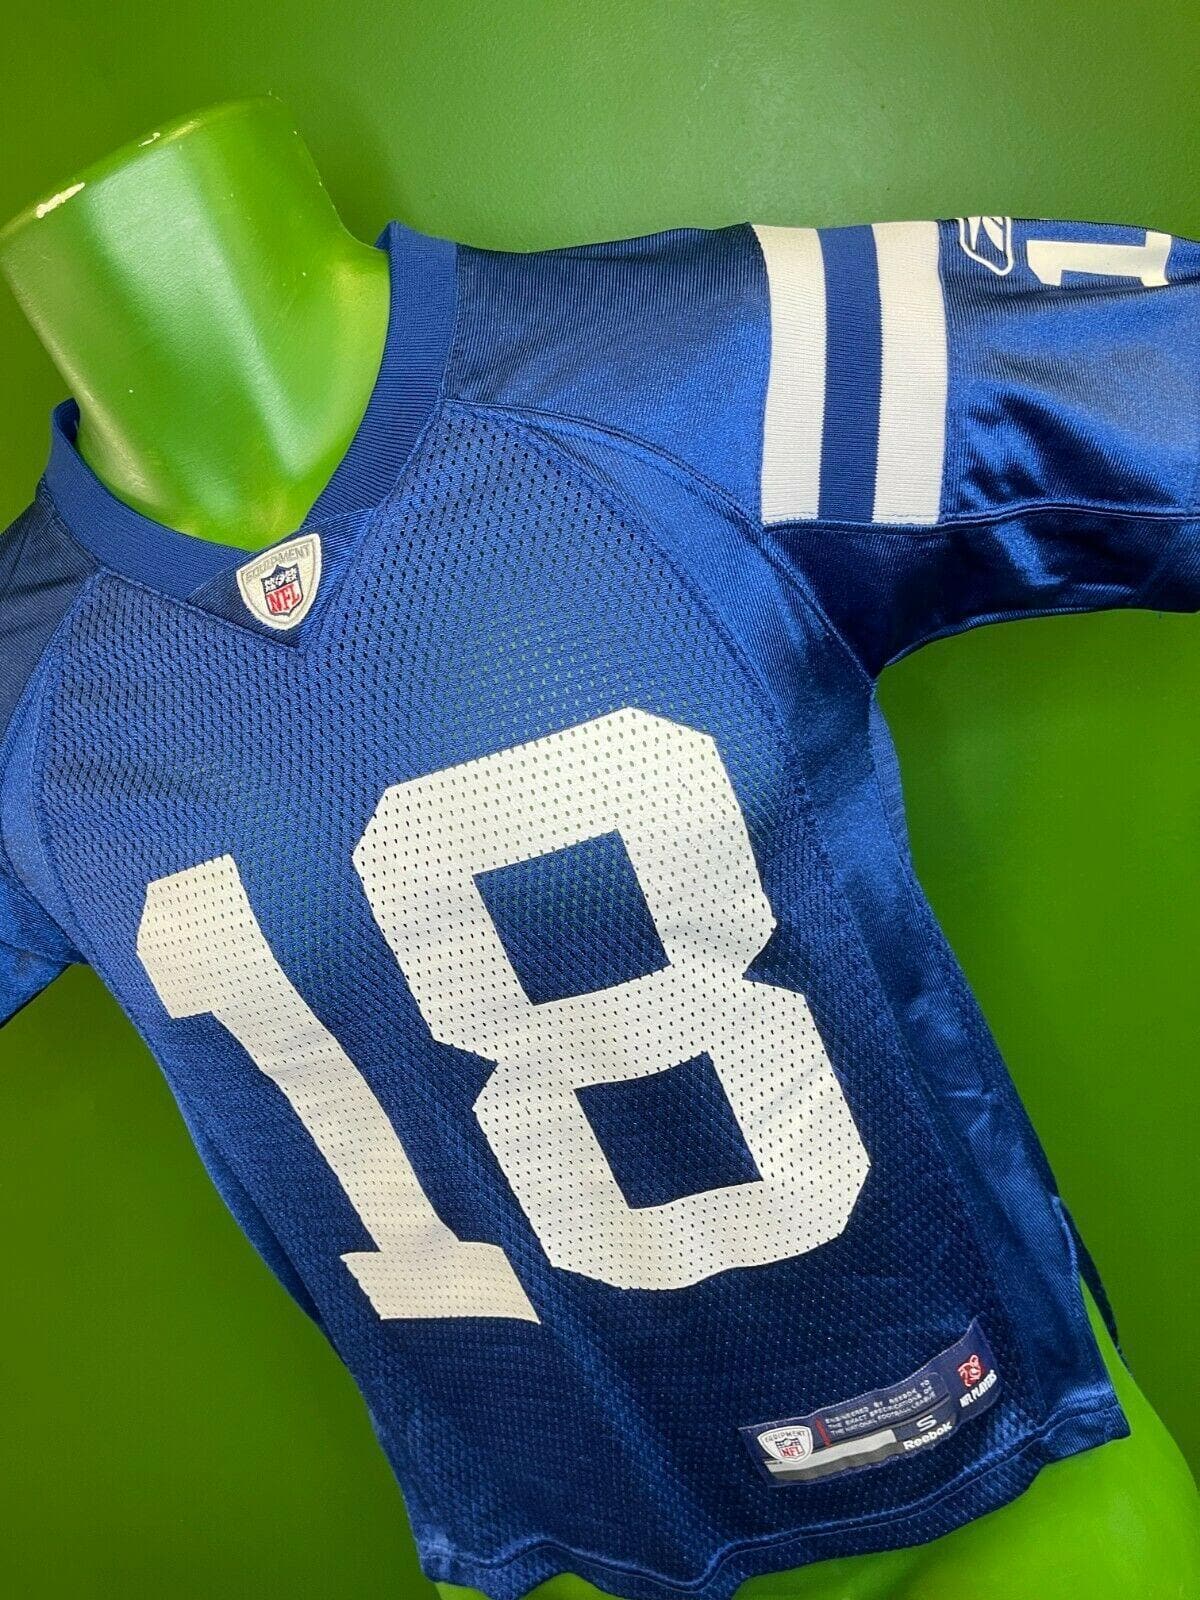 NFL Indianapolis Colts Peyton Manning #18 Reebok Jersey Youth Small 8